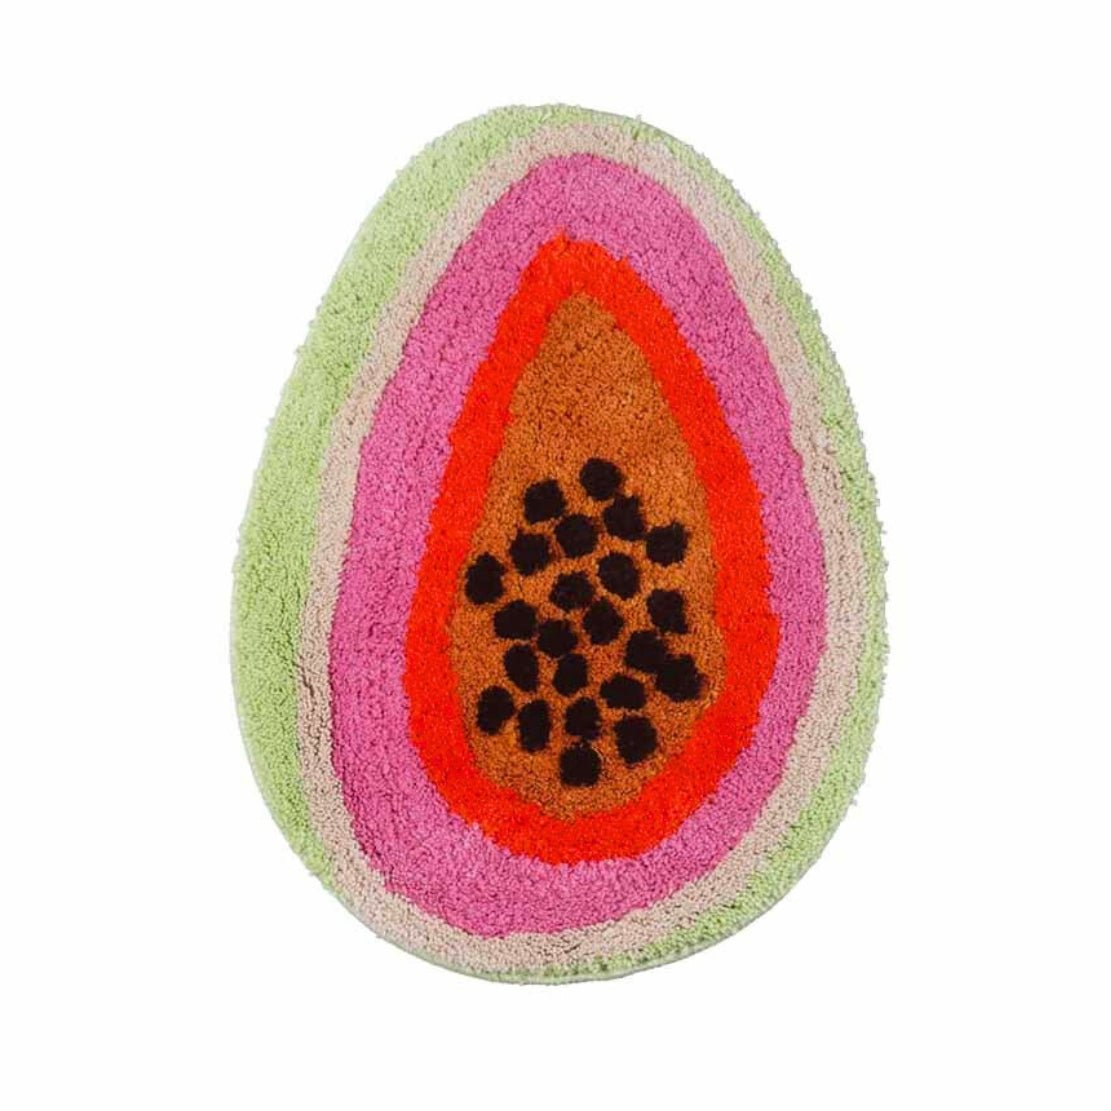 Green, pink, red and brown passionfruit bathmat rug